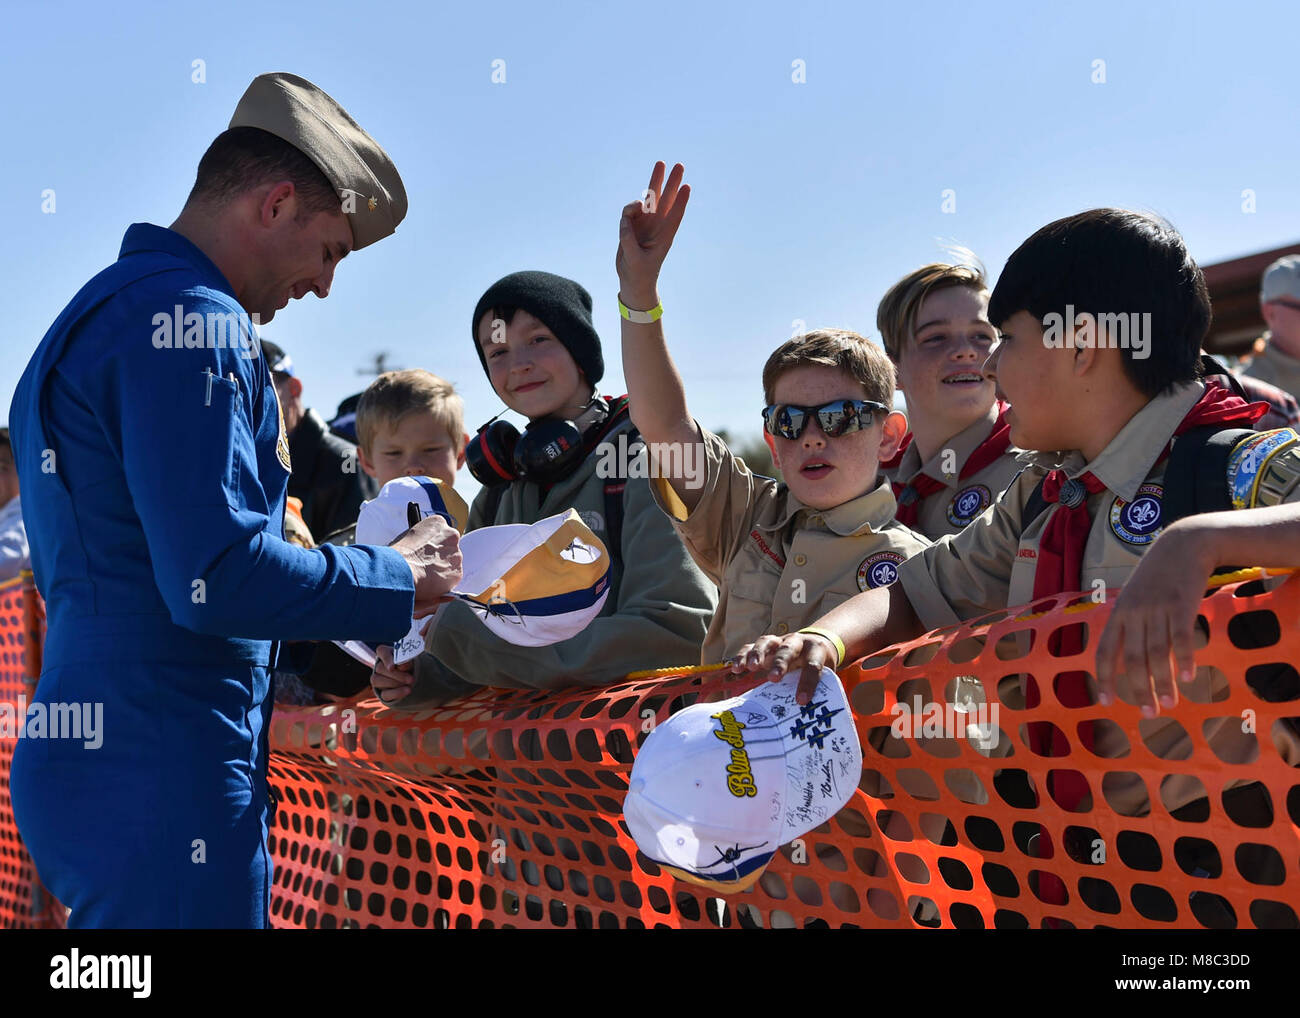 NAF EL CENTRO, Calif. (Feb. 24, 2018) Blue Angels Left Wing Pilot, Maj. Jeff Mullins, signs autographs for local Boy Scouts following a practice demonstration. The Blue Angels are scheduled to perform more than 60 demonstrations at more than 30 locations across the U.S. in 2018. (U.S. Navy Stock Photo